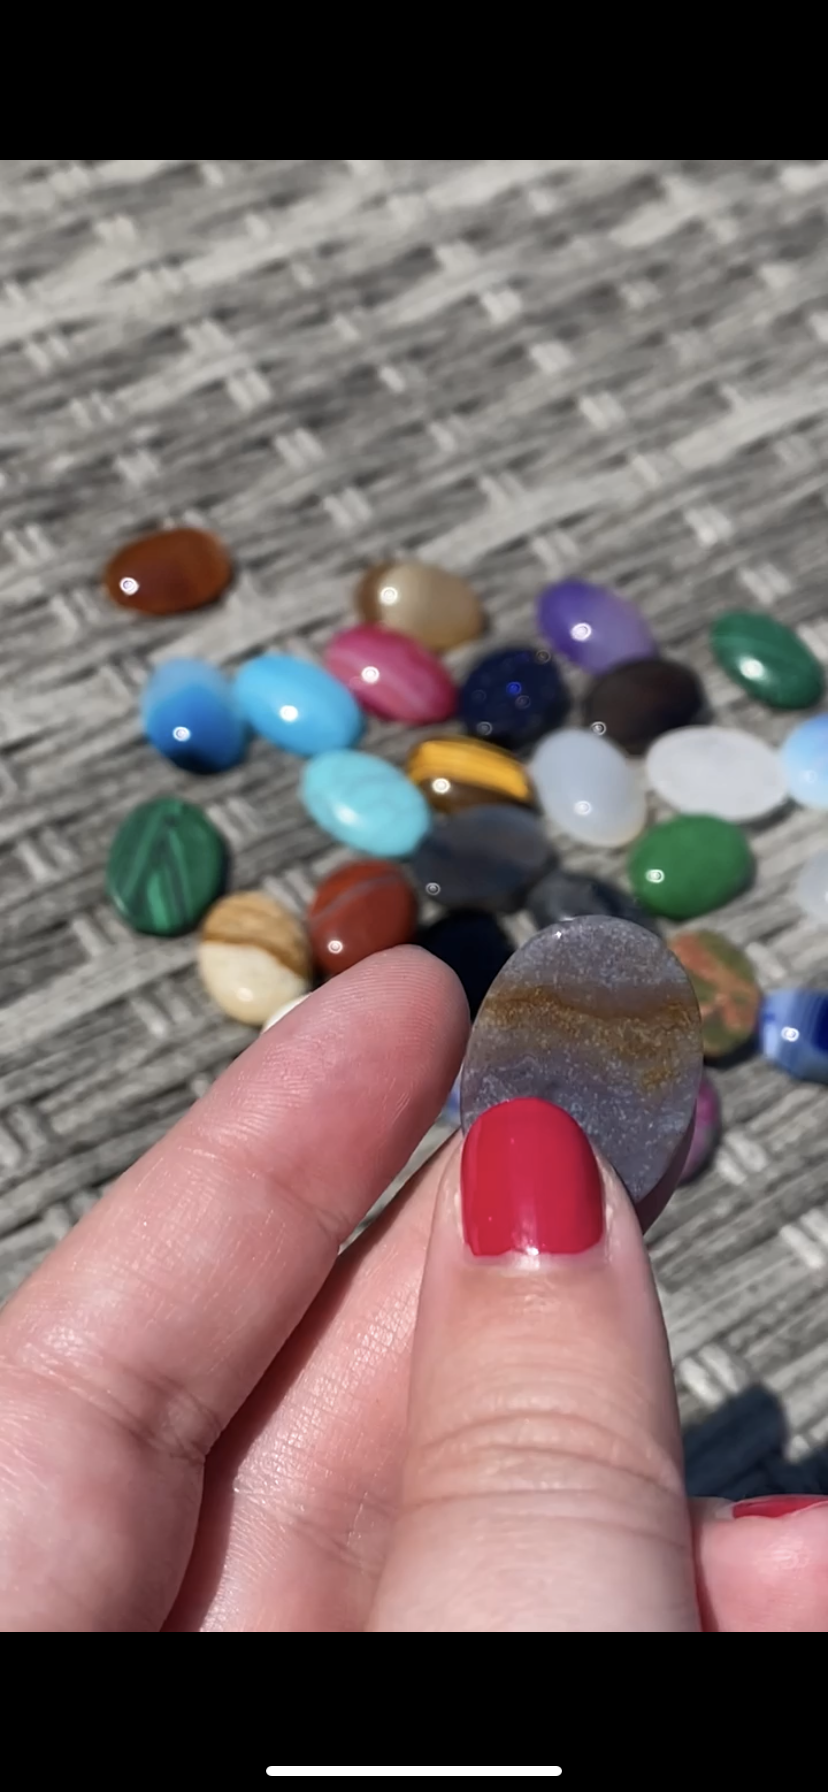 Mystery small worry stone // pocket sized stone for anxiety